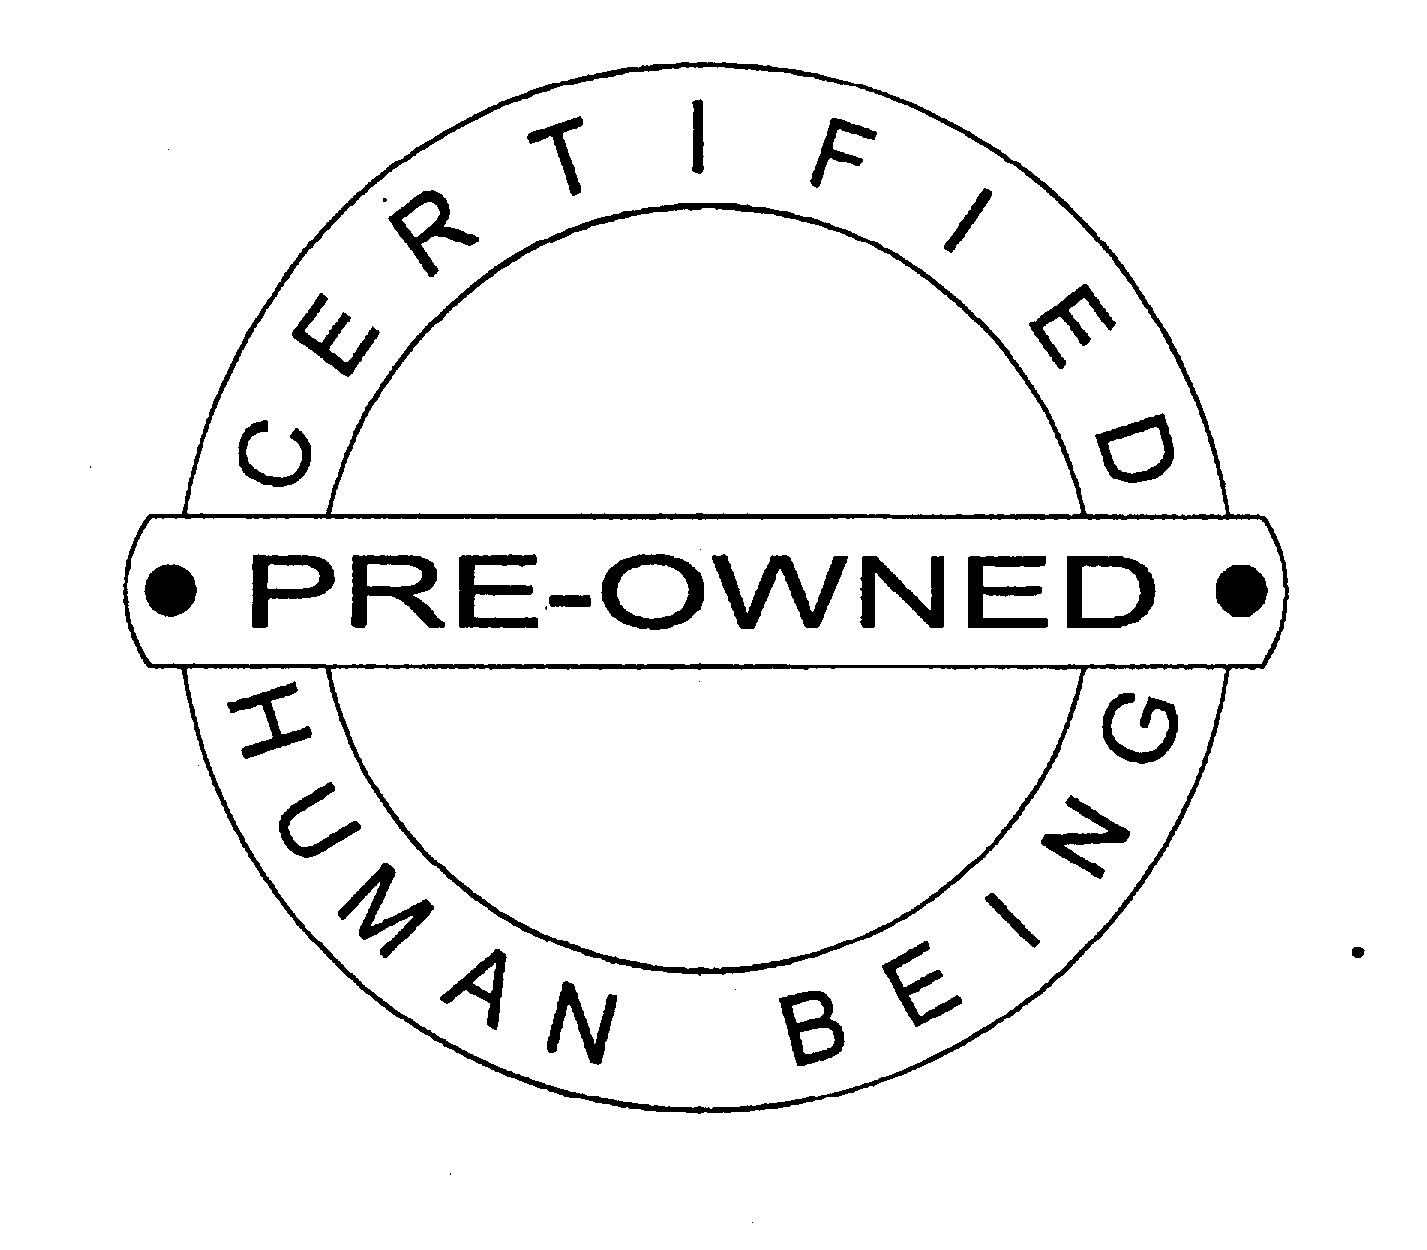  CERTIFIED PRE-OWNED HUMAN BEING